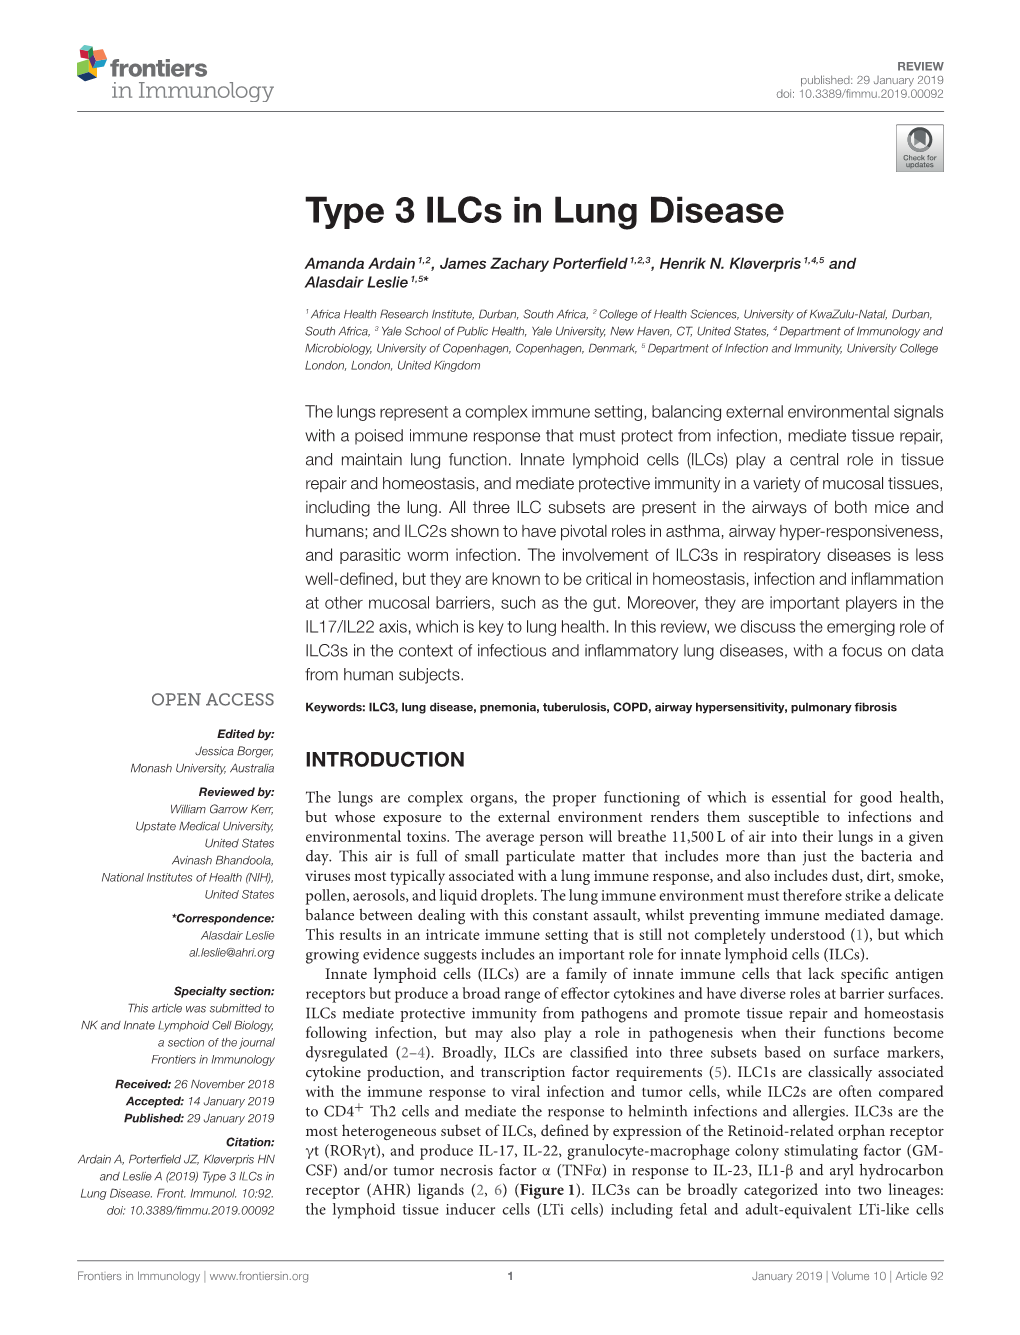 Type 3 Ilcs in Lung Disease